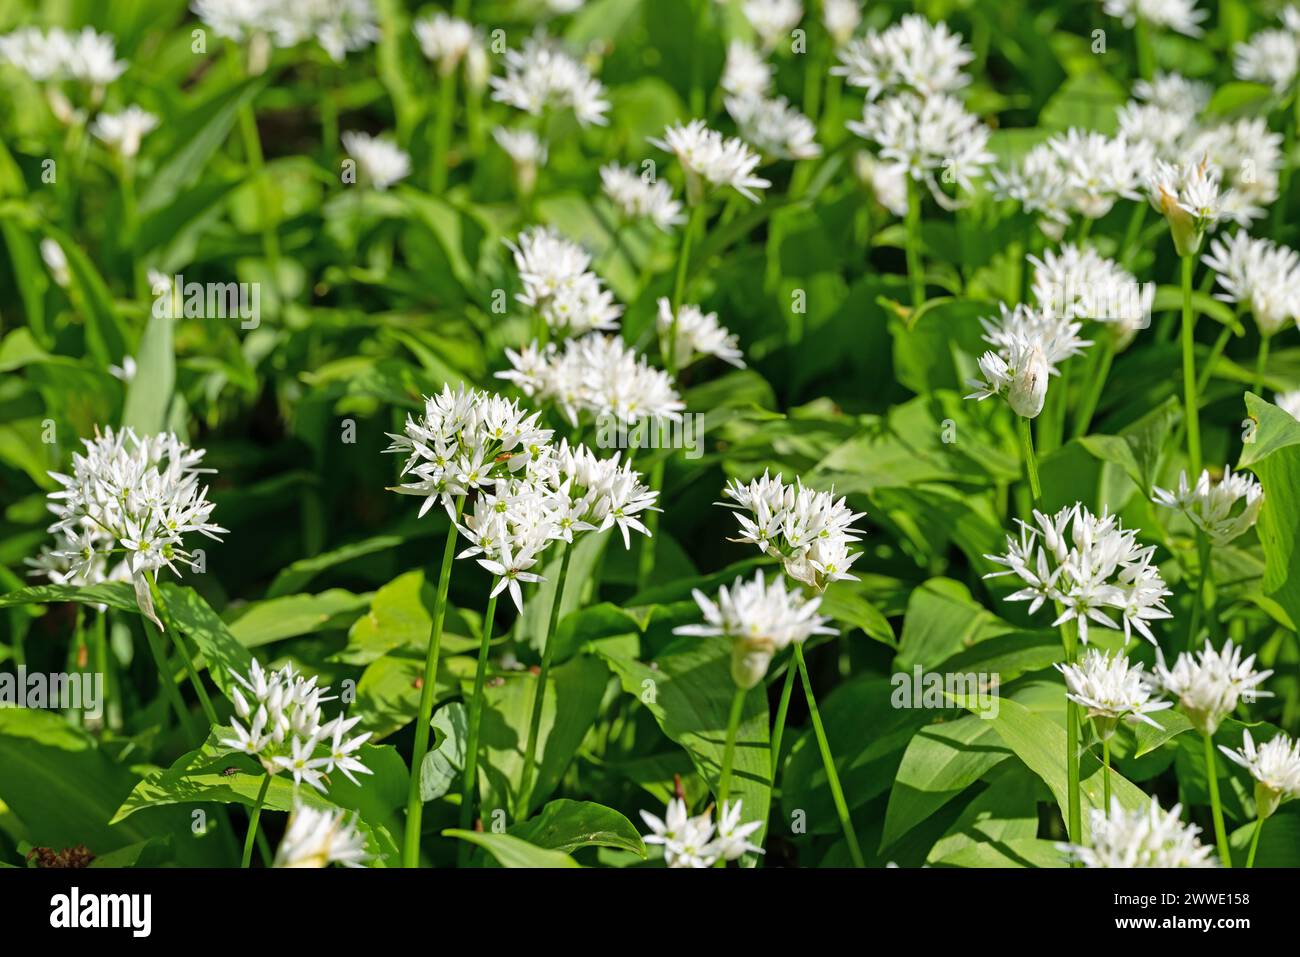 Wild garlic blooming in forest Stock Photo